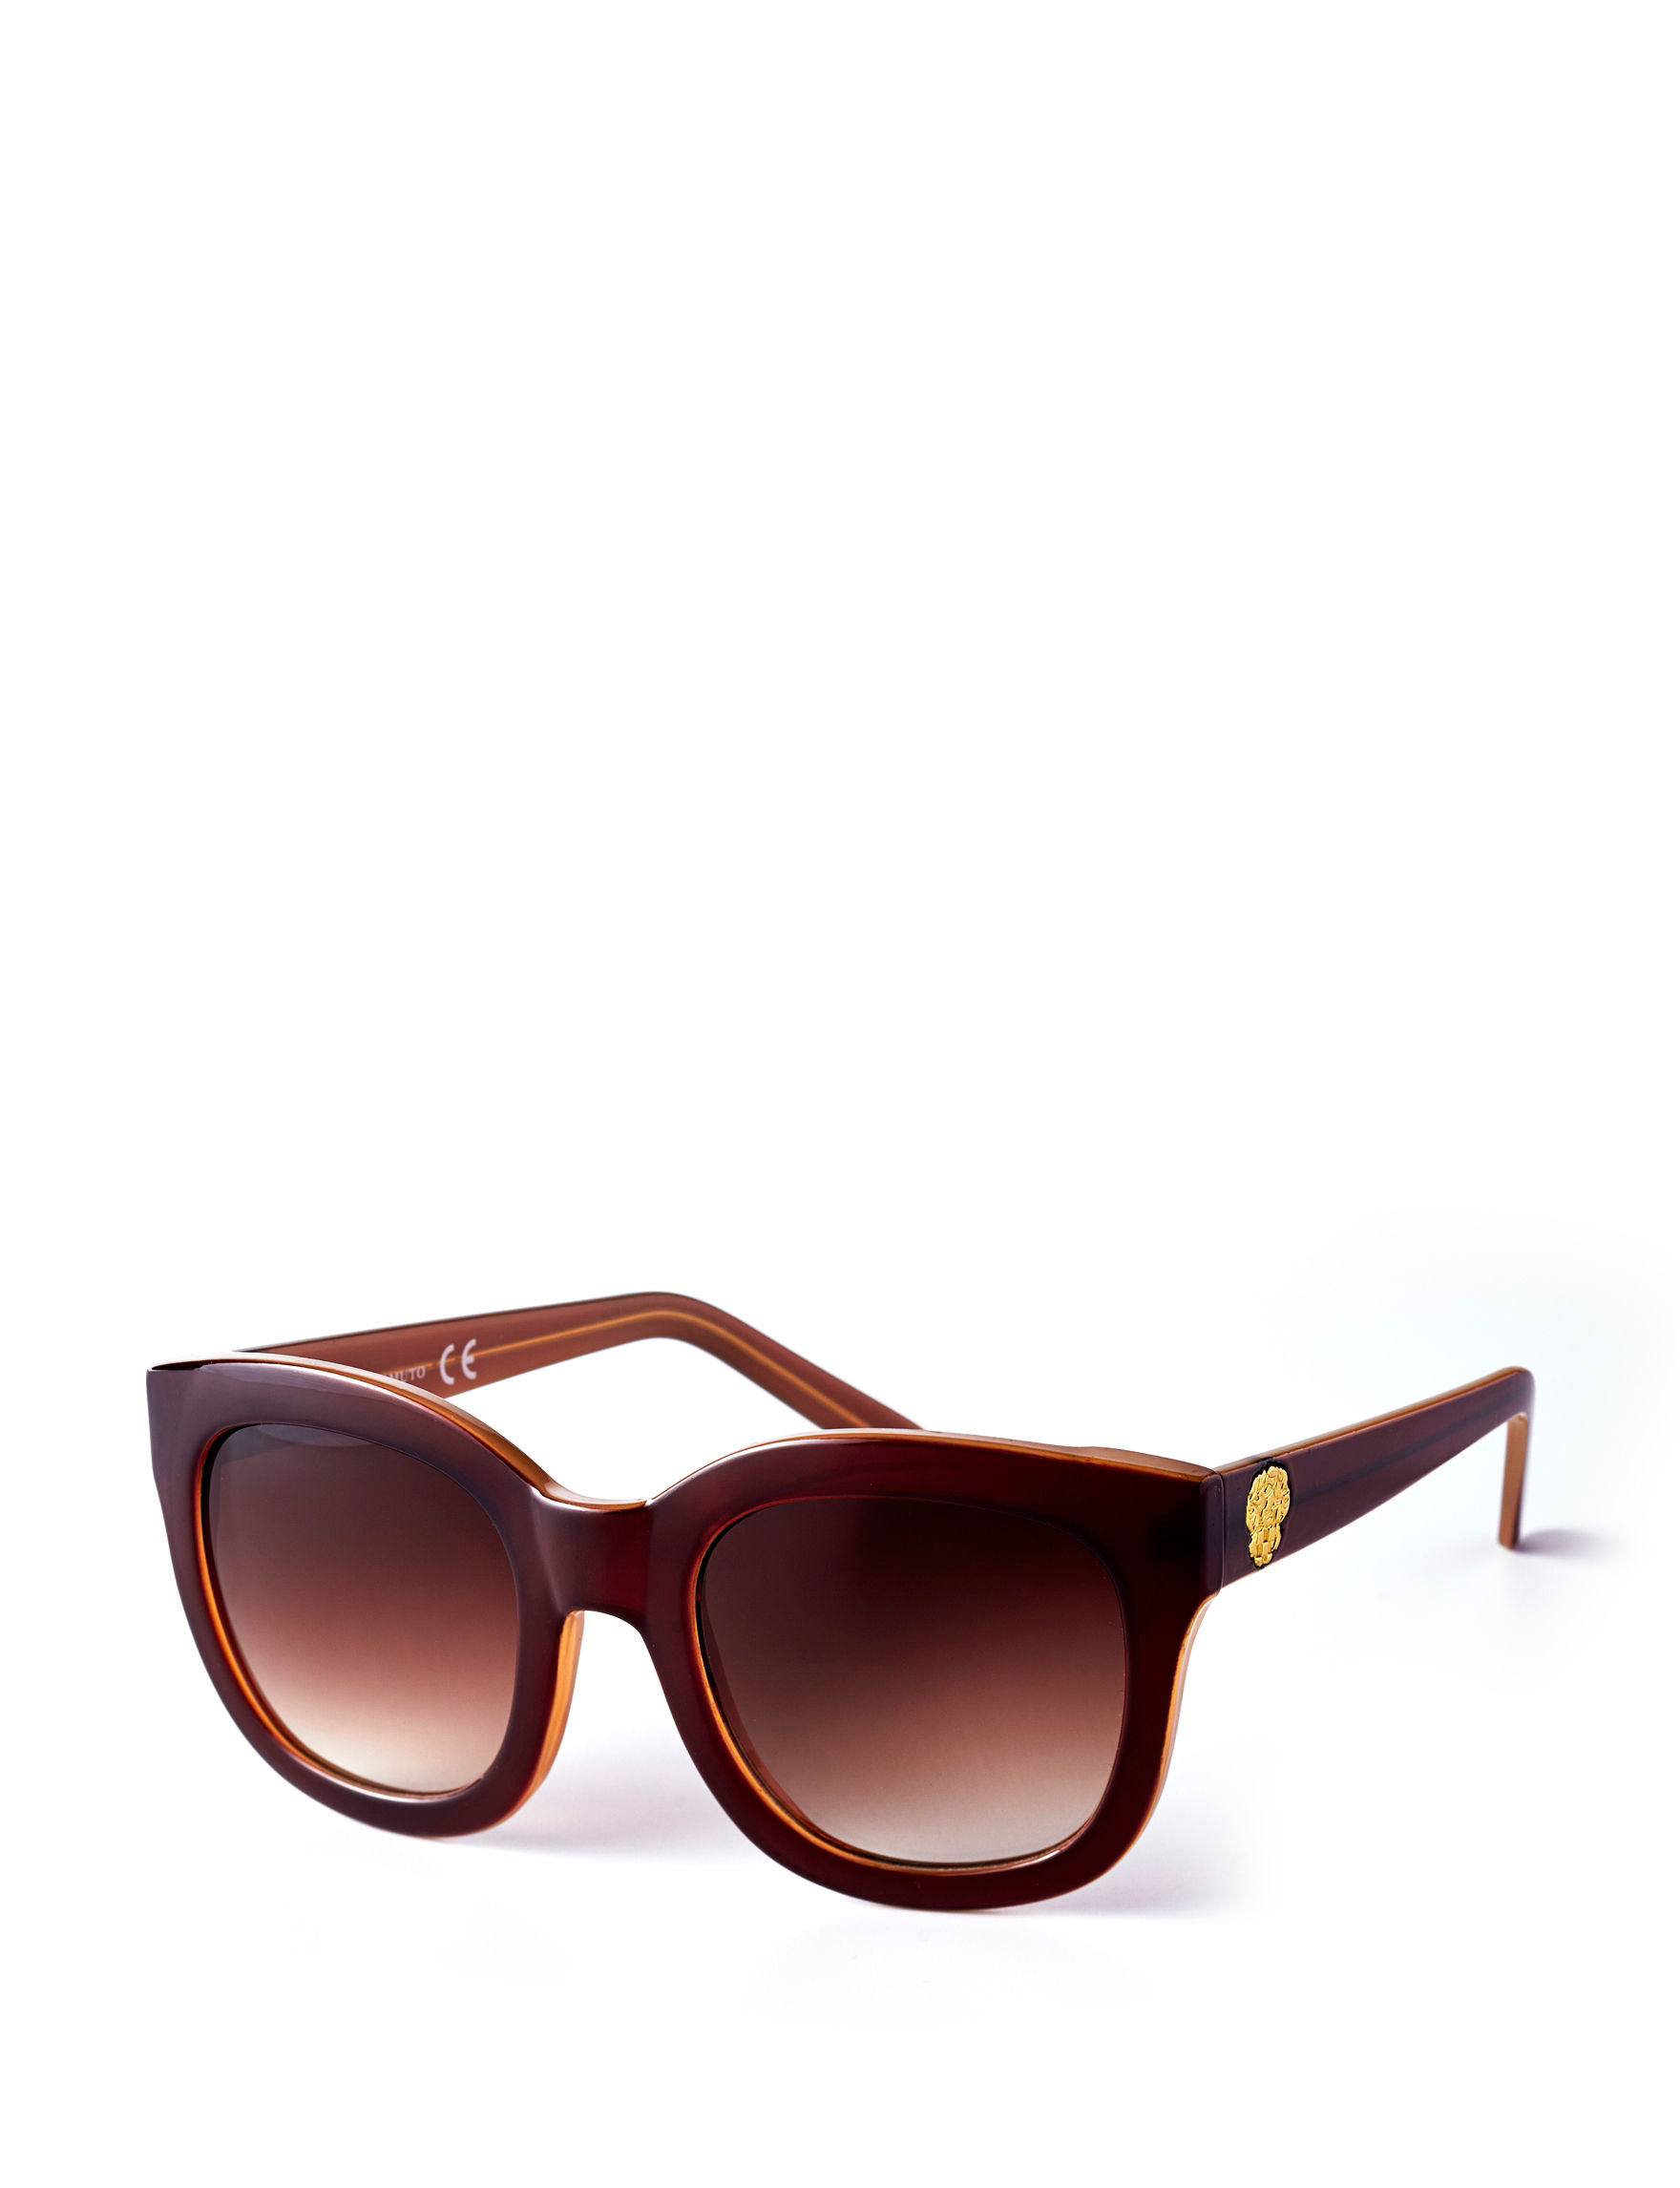 UPC 781268611428 product image for Vince Camuto Oversized Retro Glam Sunglasses - Brown - Vince Camuto | upcitemdb.com